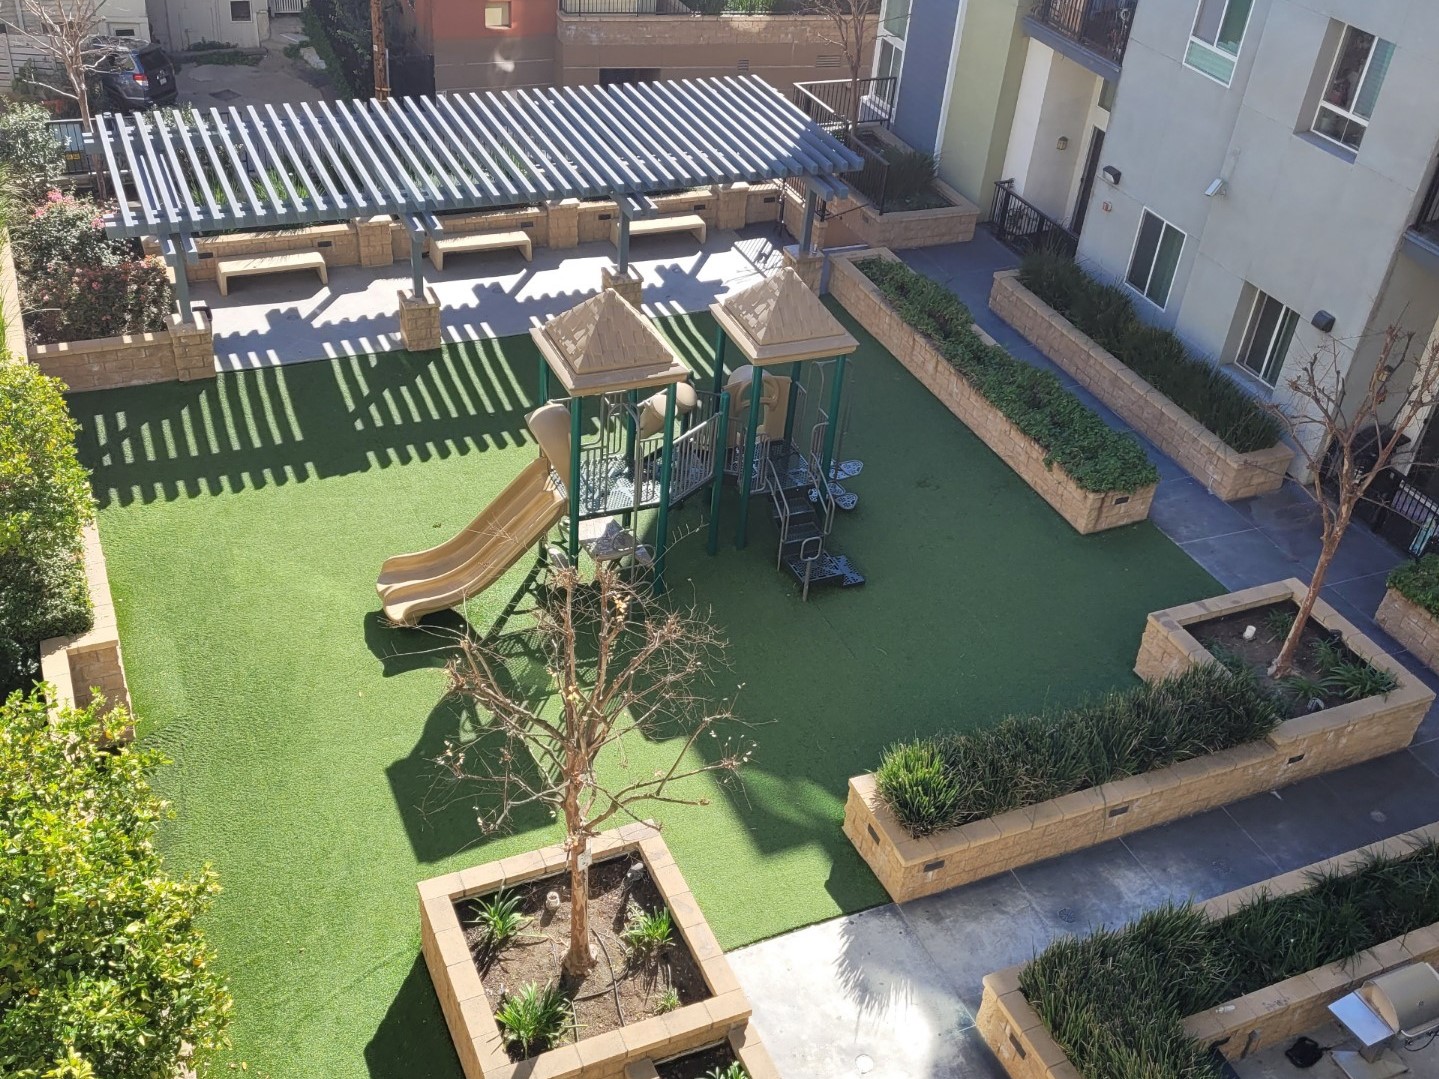 Aerial view of brown and green playground